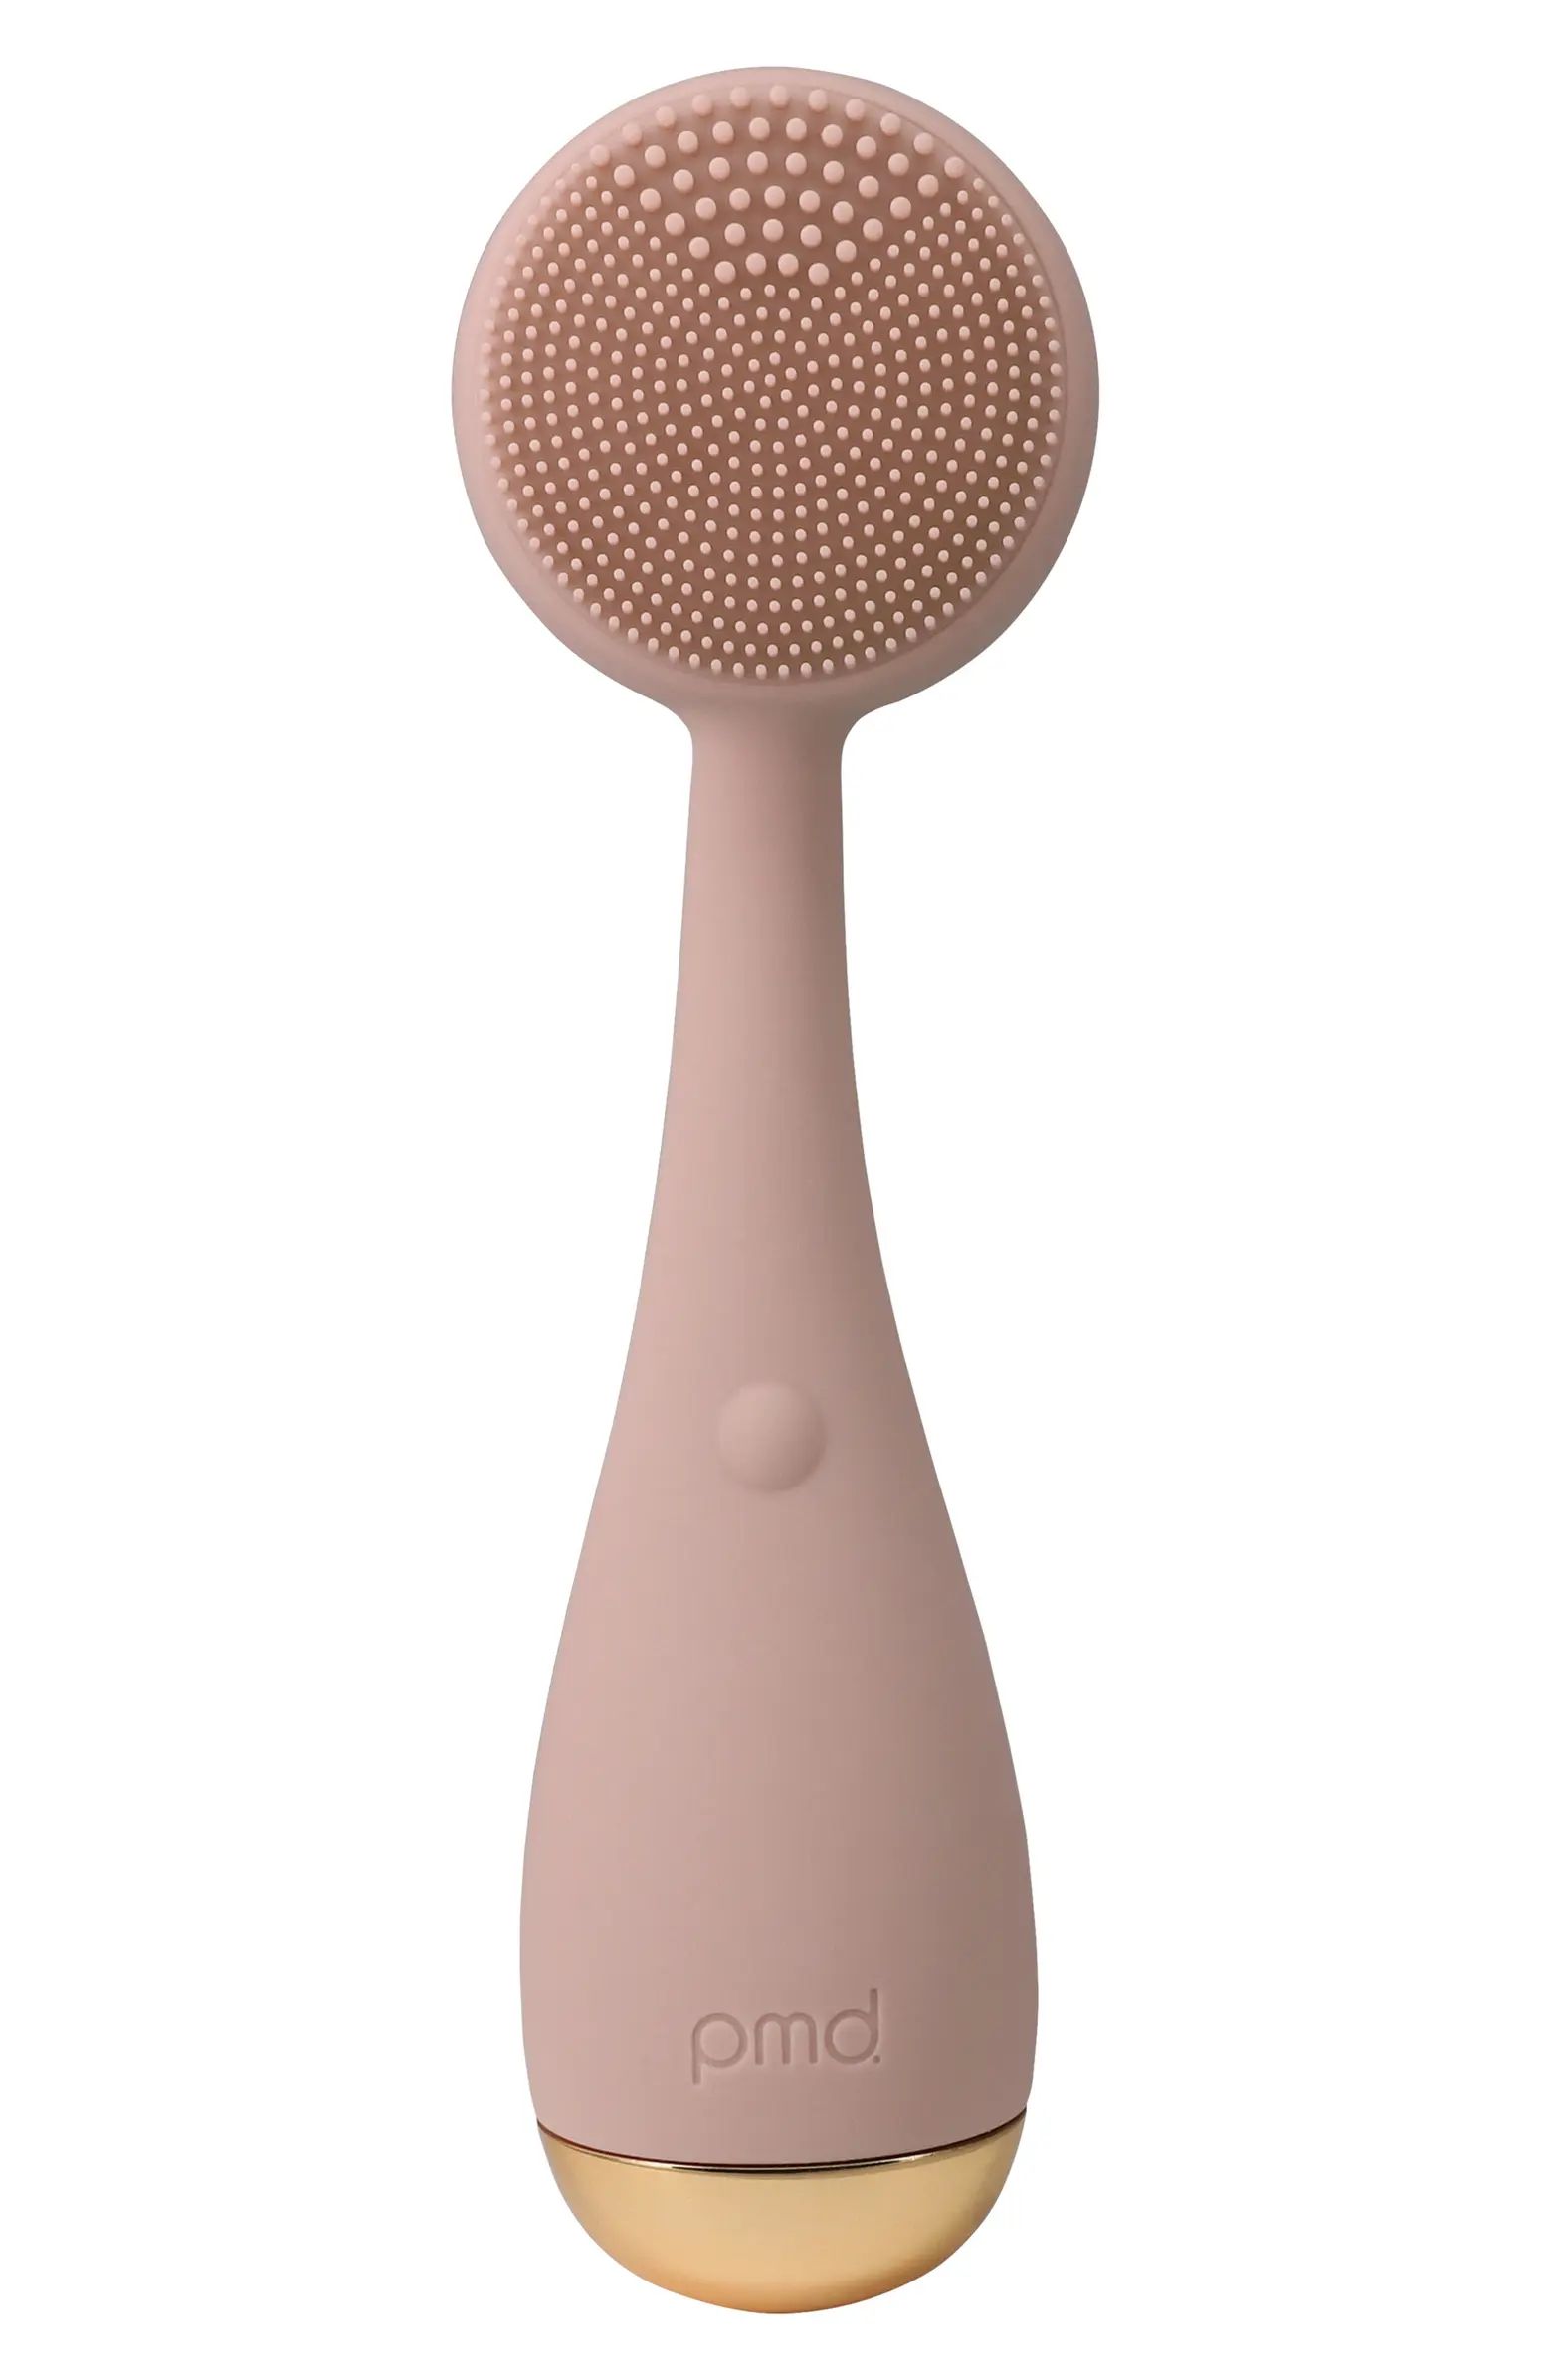 Clean Facial Cleansing Device | Nordstrom Rack